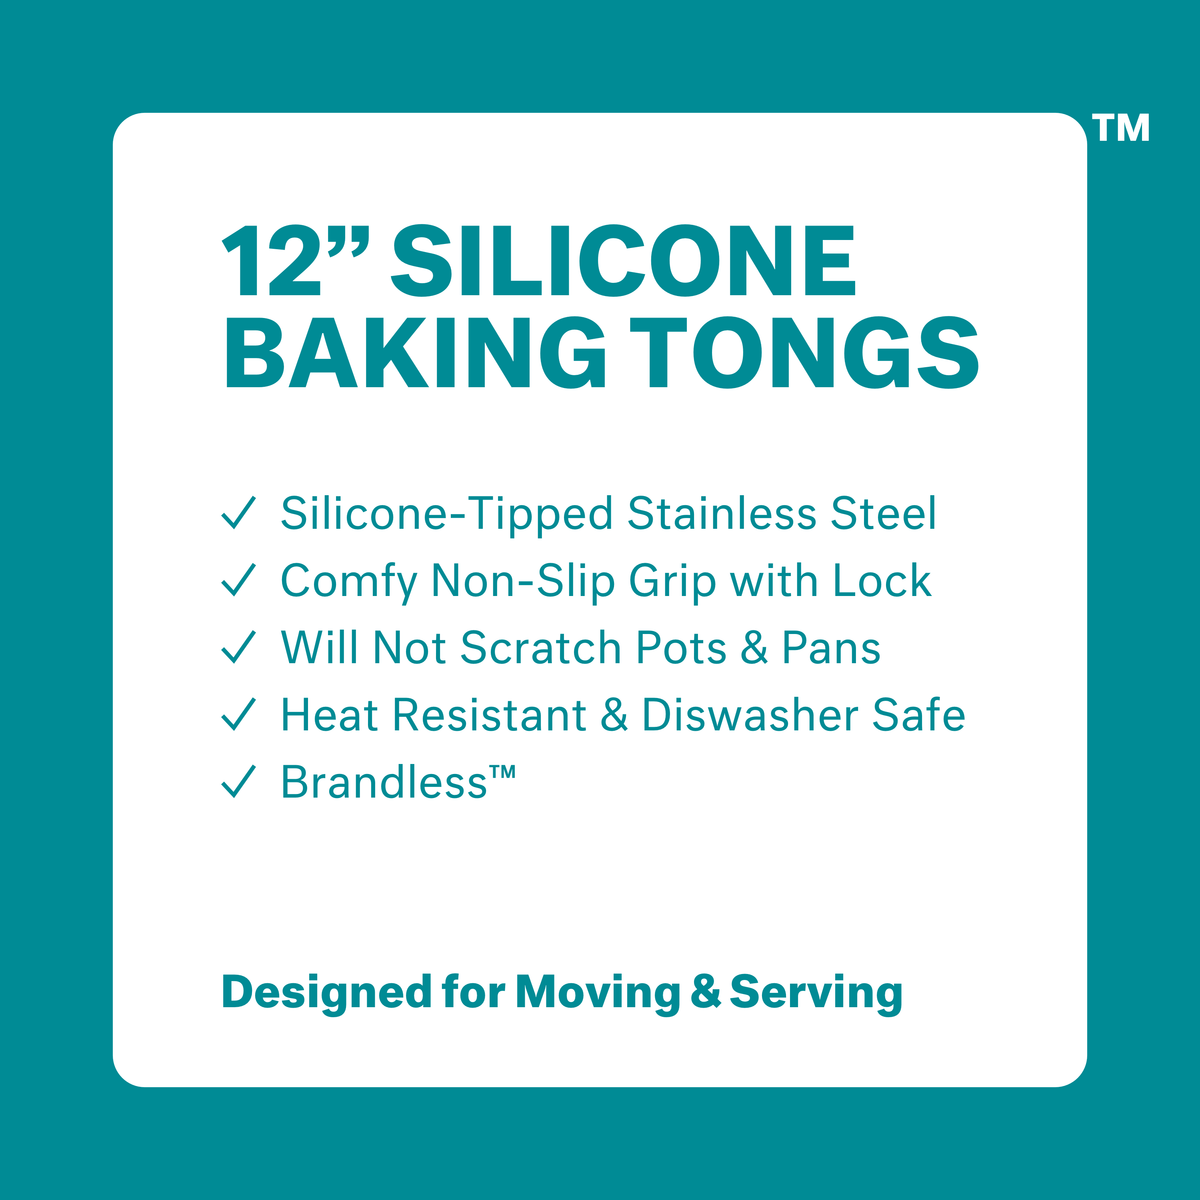 12 inch silicone baking tongs.  Silicone-tipped stainless steel.  Comfy non-slip grip with lock.  Will not scratch pots &amp; pans.  Heat resistant &amp; dishwasher safe.  Brandless.  Designed for Moving &amp; Serving.